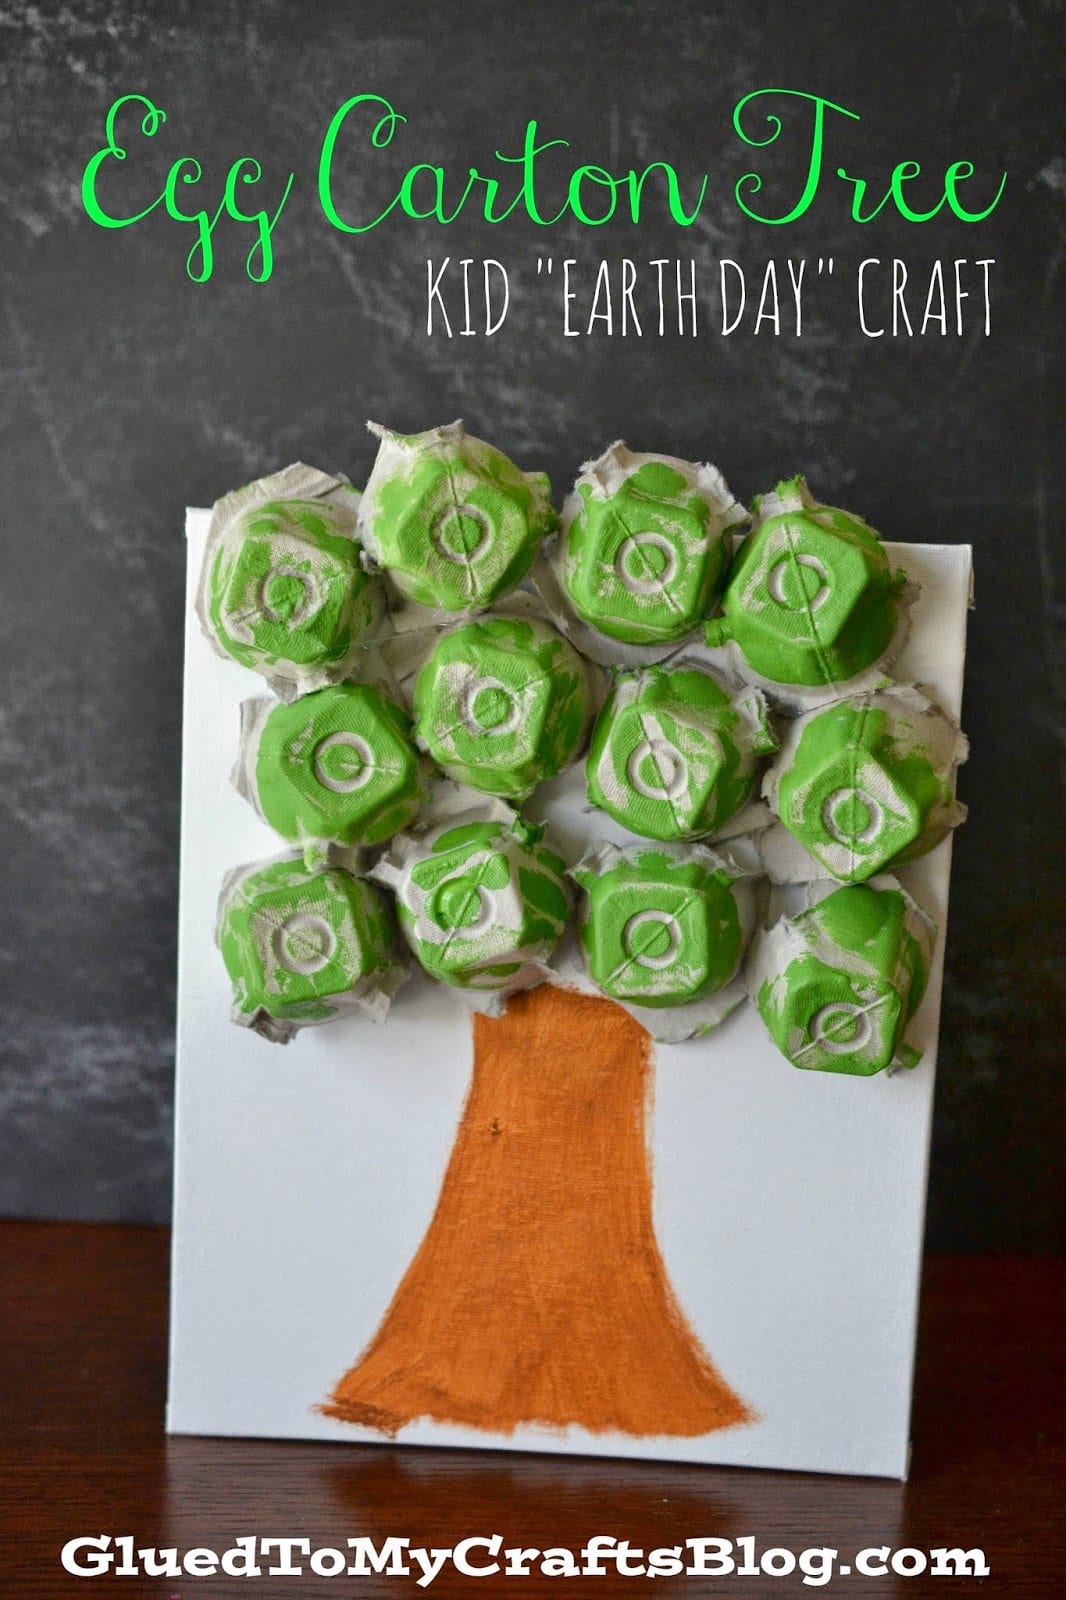 A tree trunk is painted on white paper. The leaves are made from cut up, painted green egg carton pieces (earth day crafts)